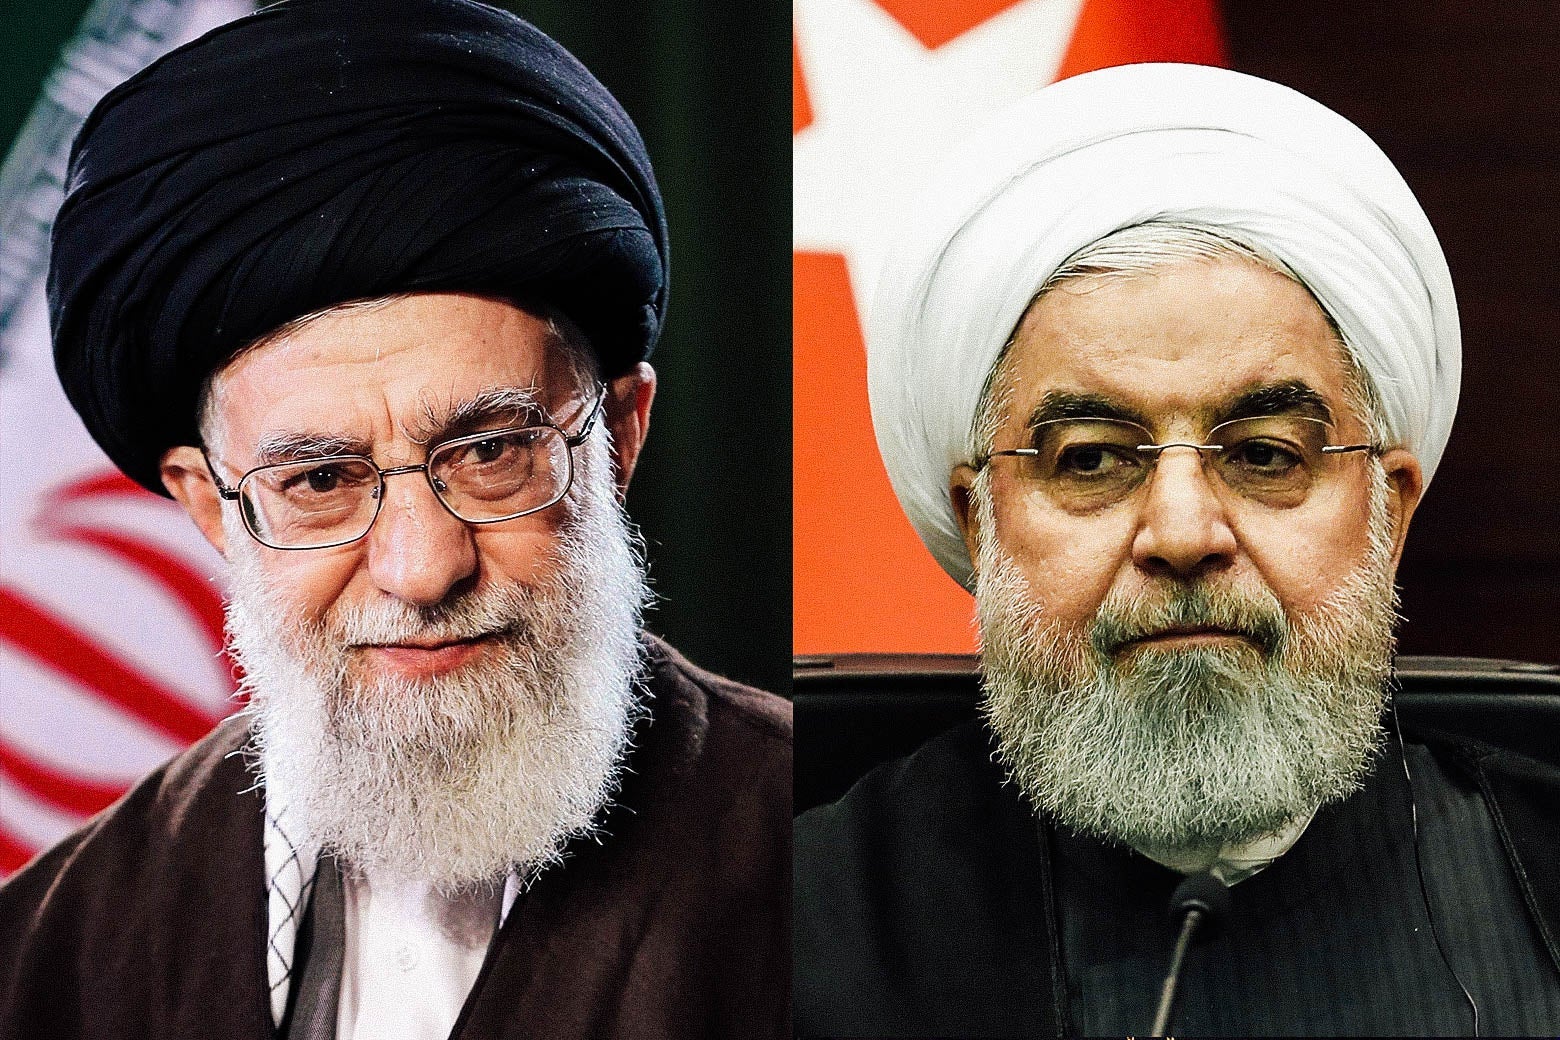 Side-by-side images of Ali Khamenei and Hassan Rouhani